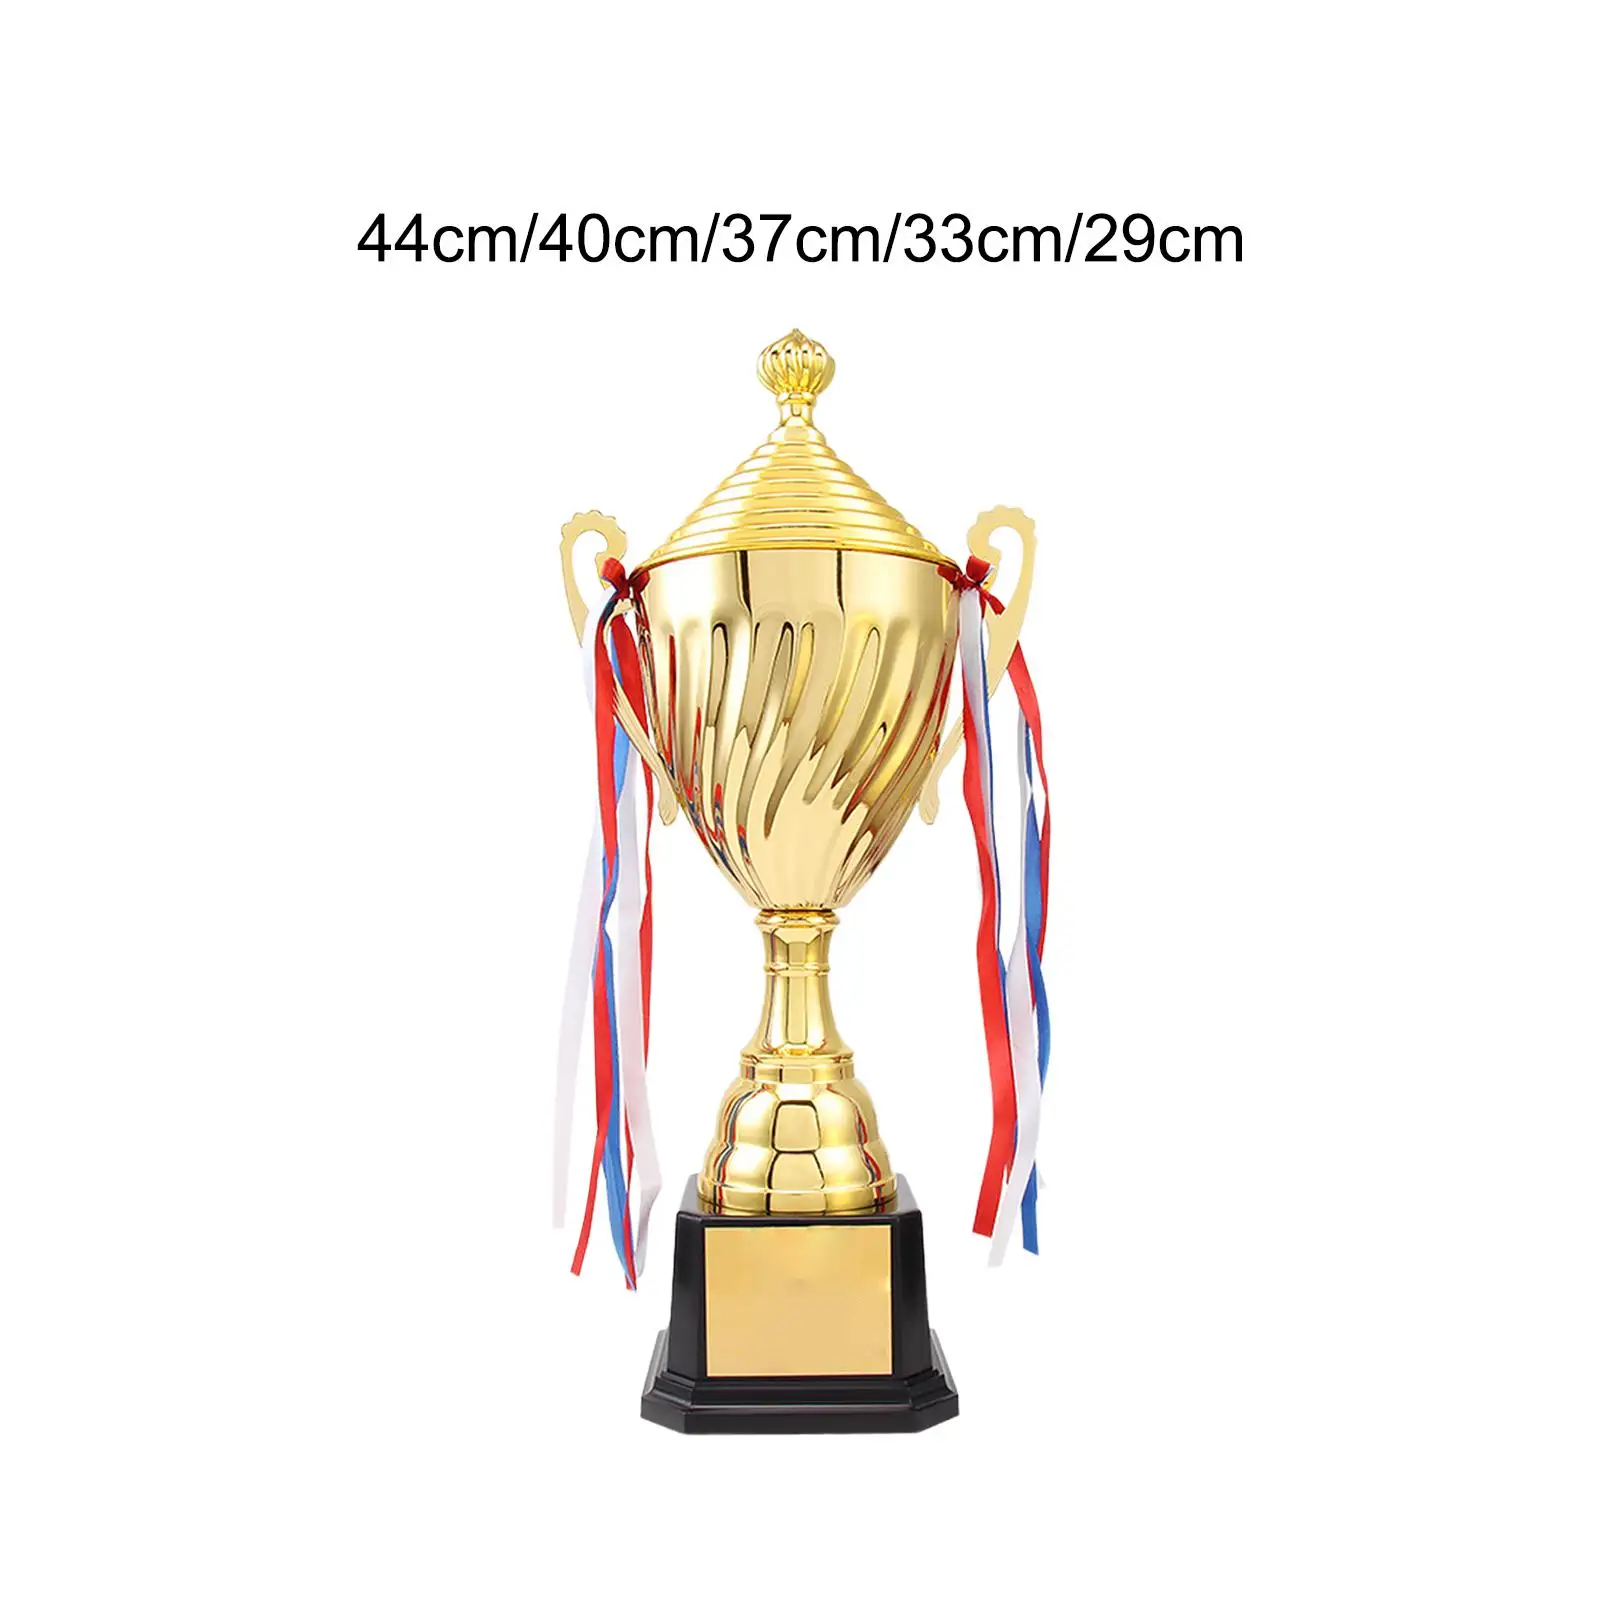 Award Trophy Cup School Party for Kids Adults Winning Prizes Trophies Prop